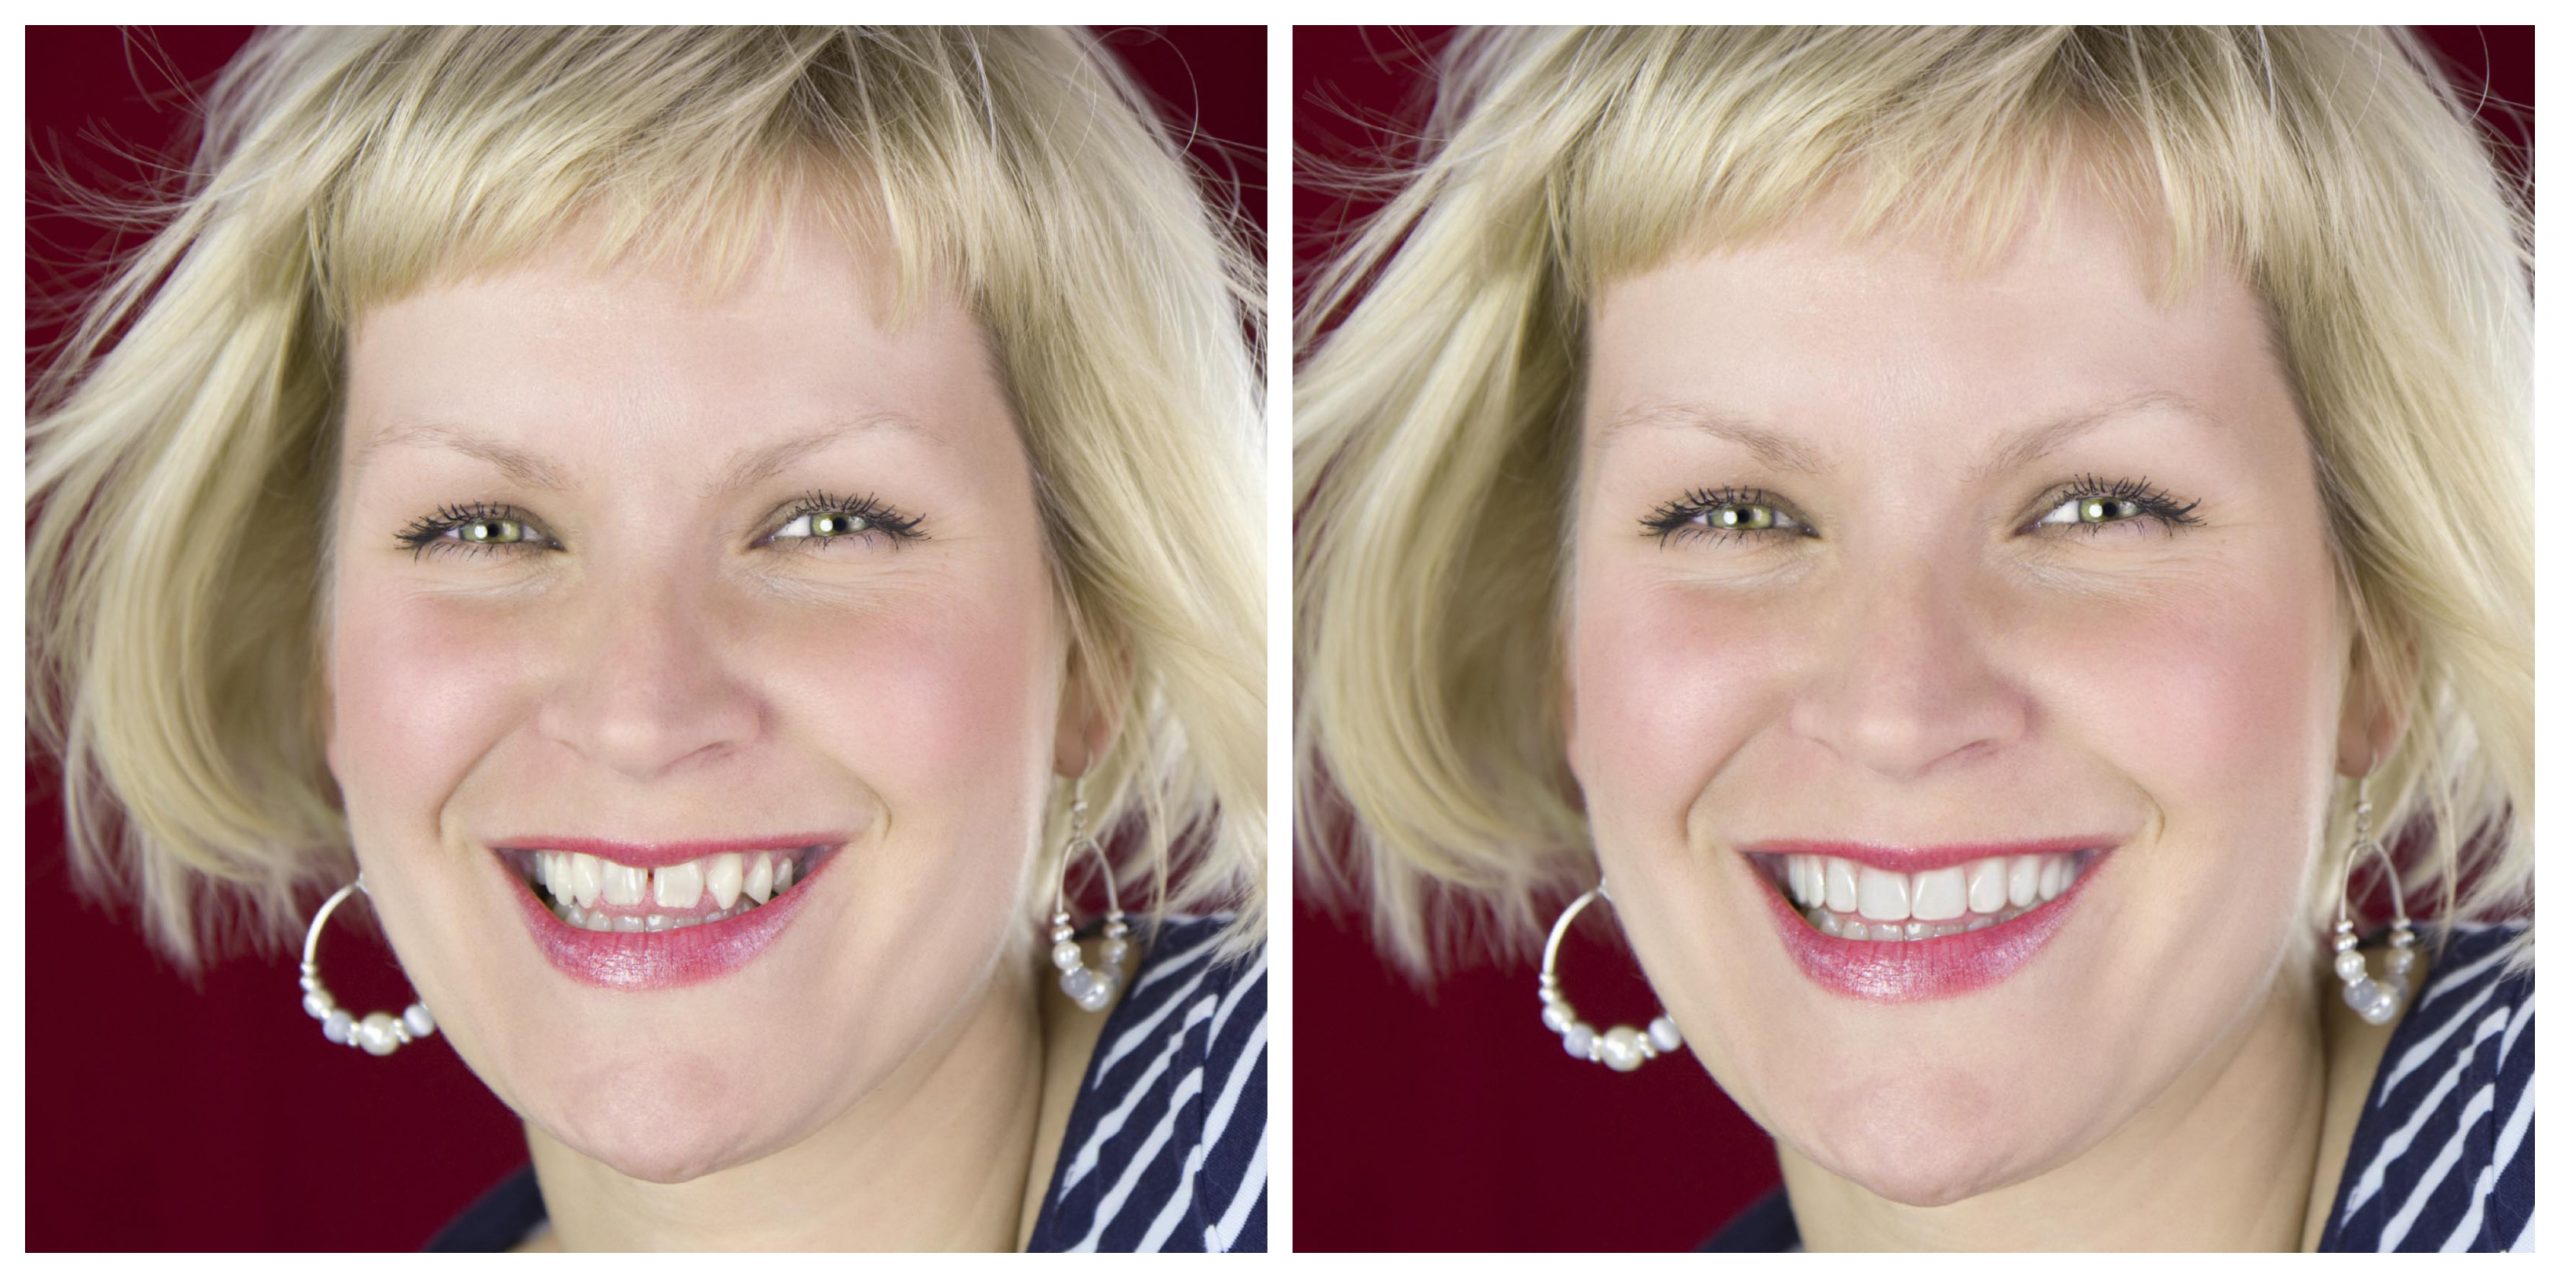 Smile Restoration - Before and After5